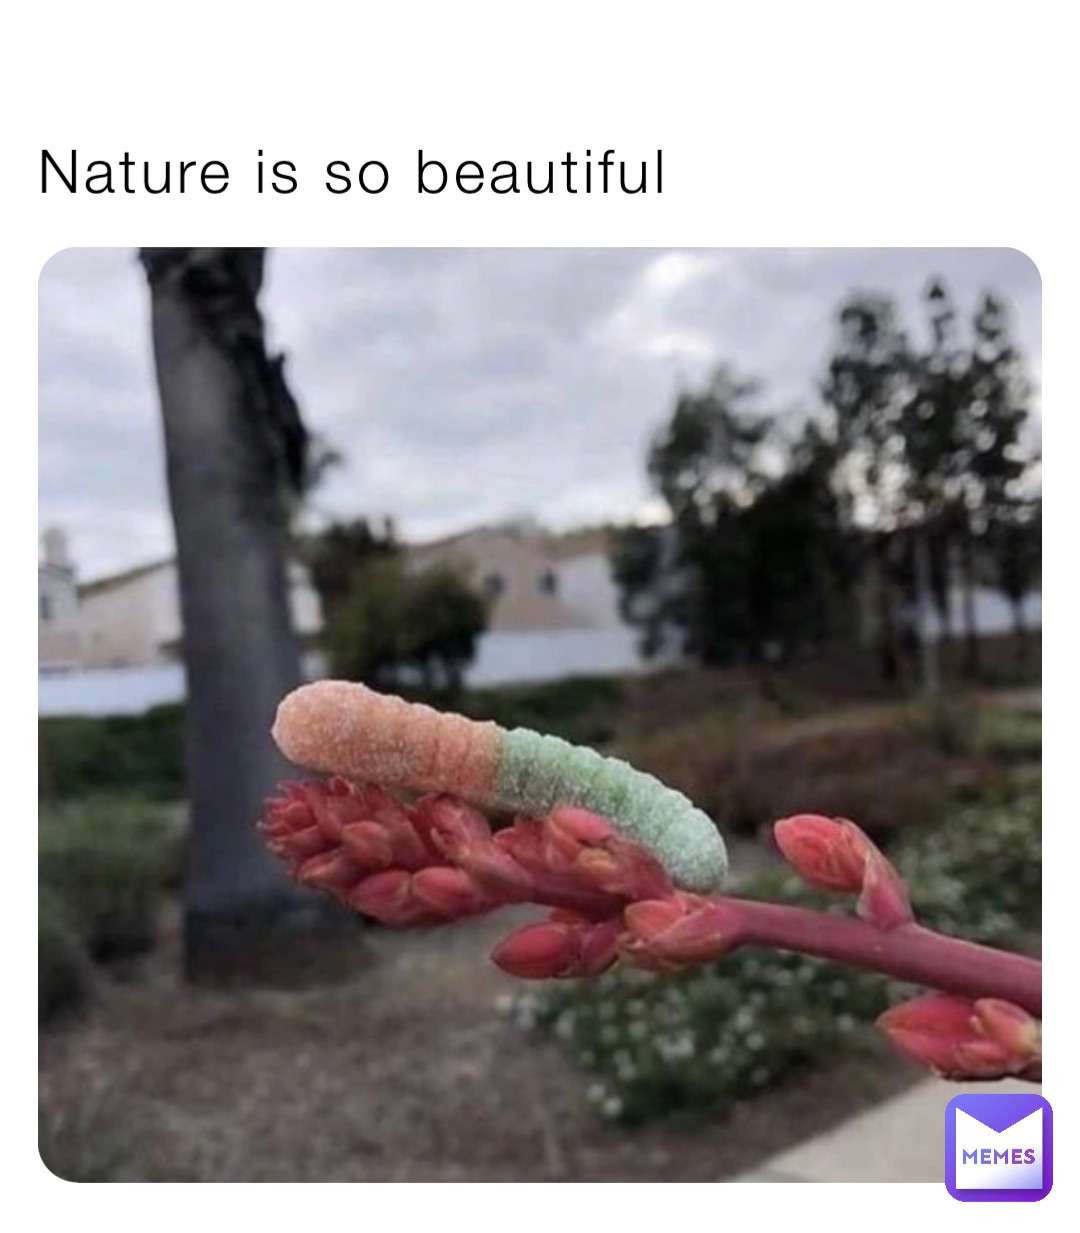 Nature is so beautiful